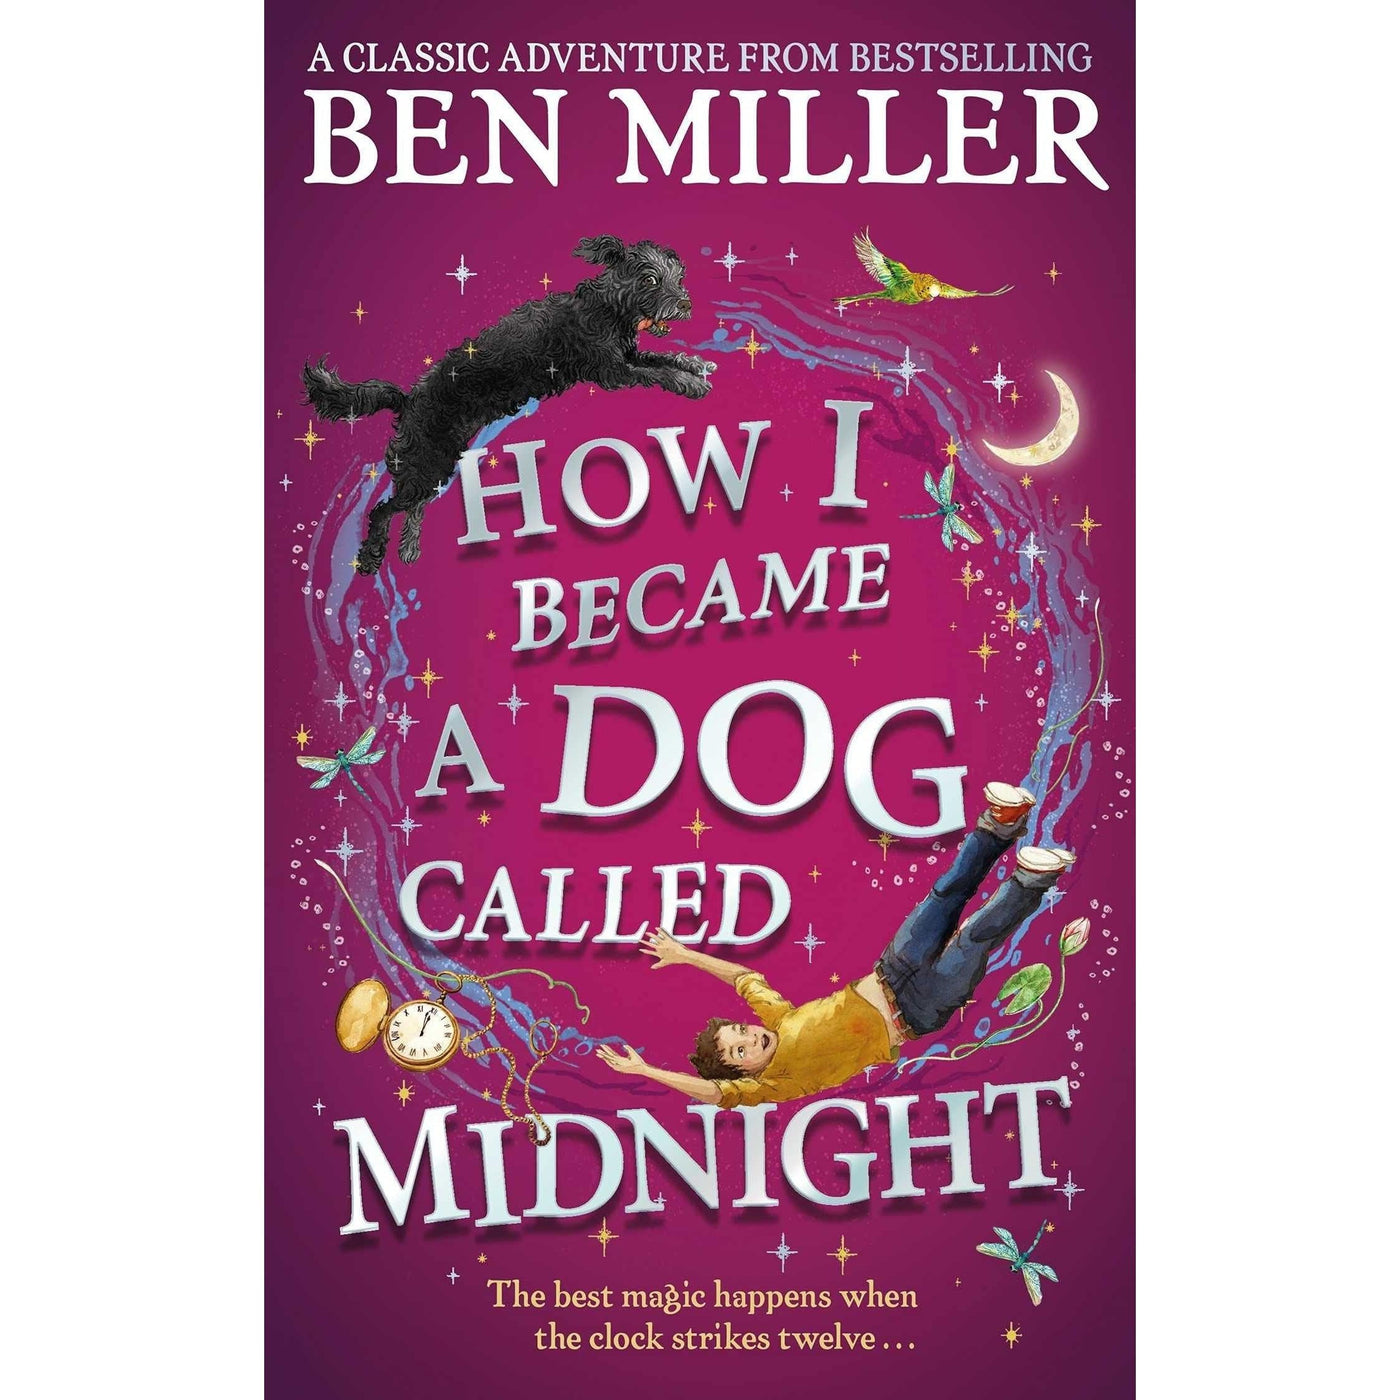 How I Became A Dog Called Midnight: A Magical Adventure From The Bestselling Author Of The Day I Fell Into A Fairytale